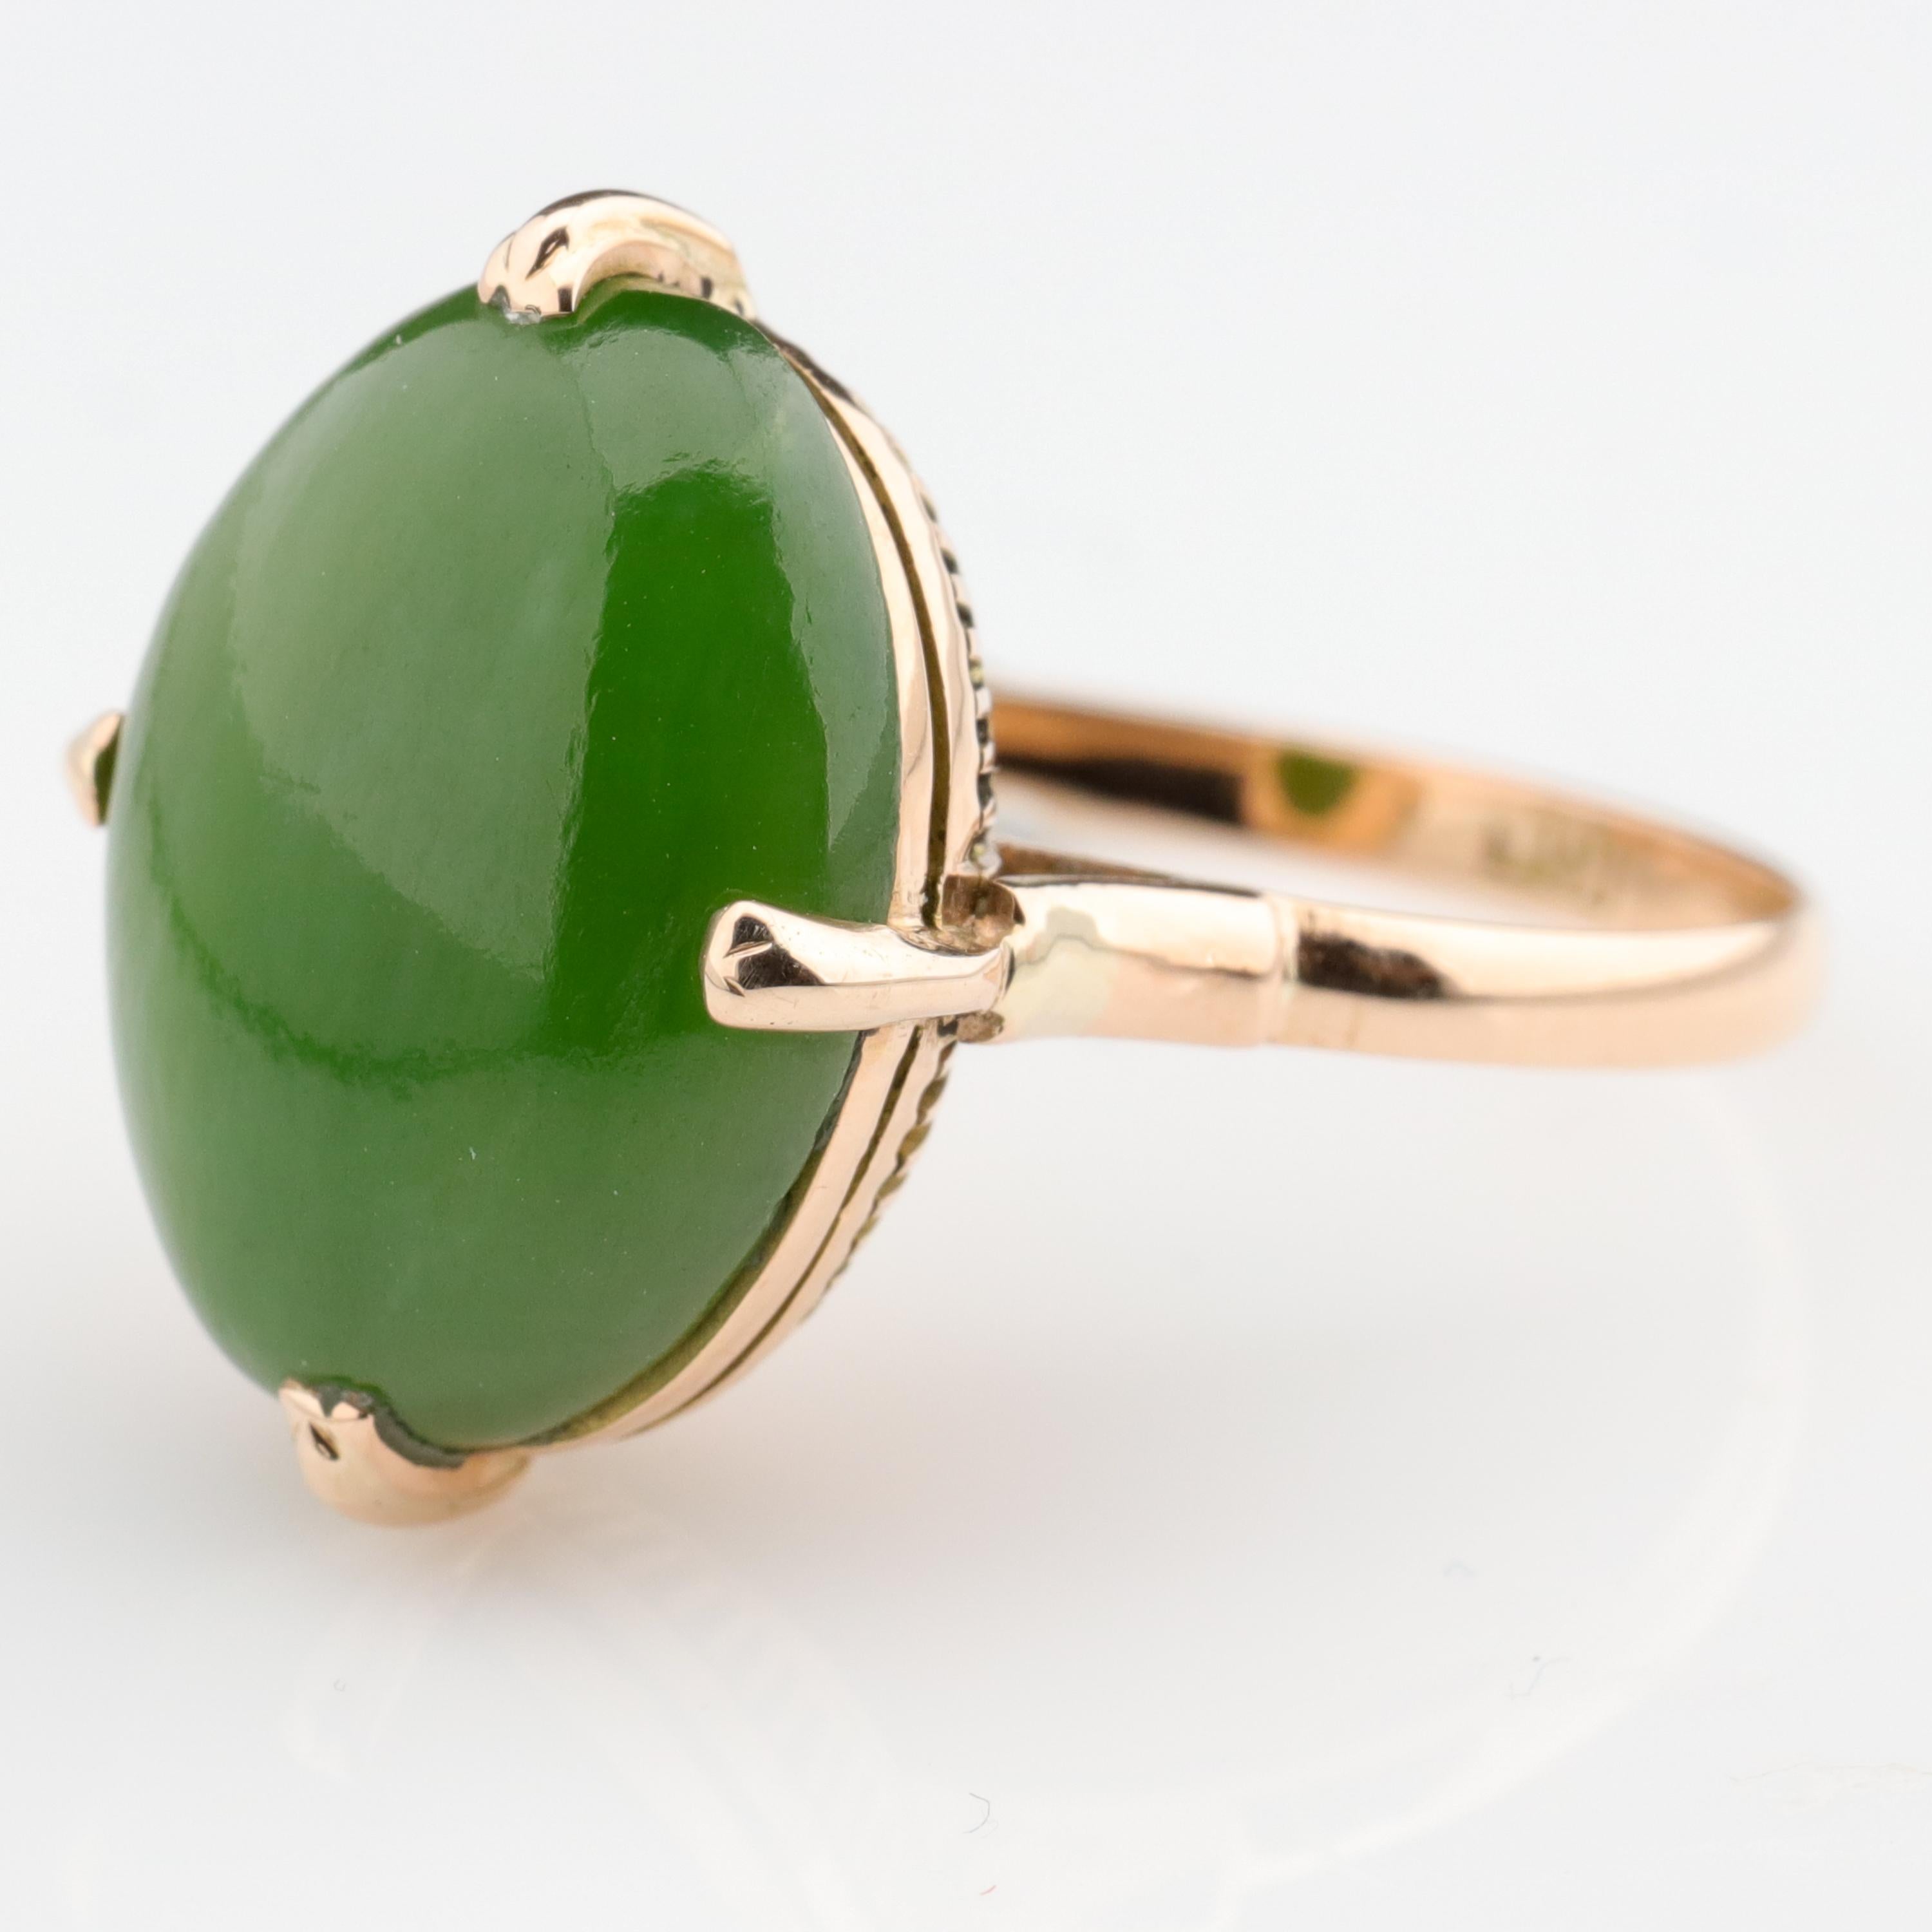 Featuring a high-quality, translucent  15.77 mm x 11.93 mm natural and untreated nephrite jade cabochon with its gorgeous, original and unadulterated polish, this Victorian-era 14k rose gold ring is just about as superb a Retro-era nephrite ring as